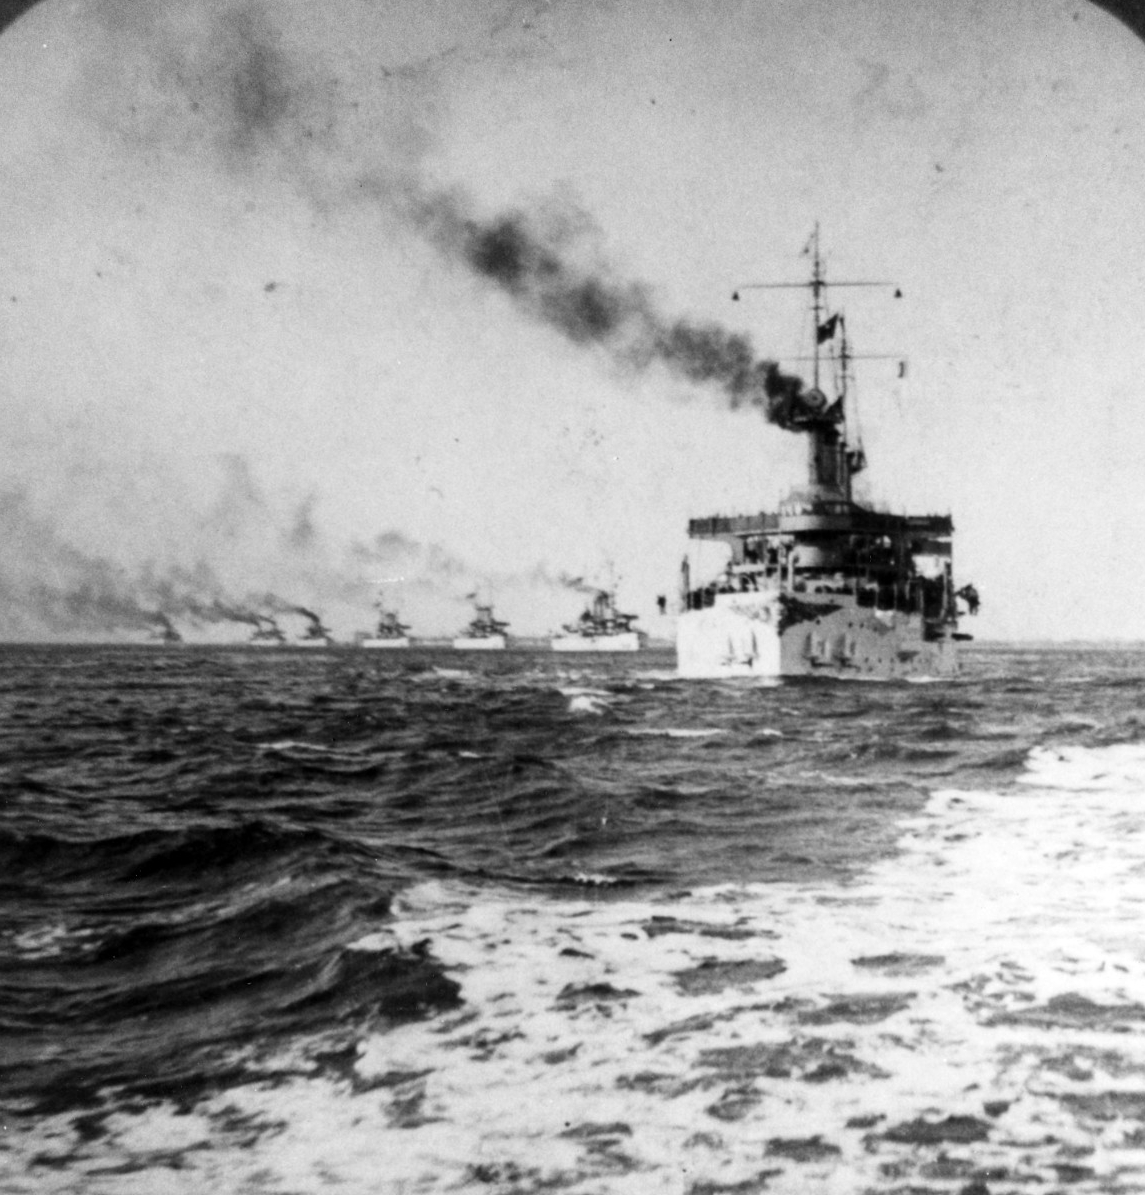 USS CONNECTICUT (BB-18) Leading the "Great White Fleet"